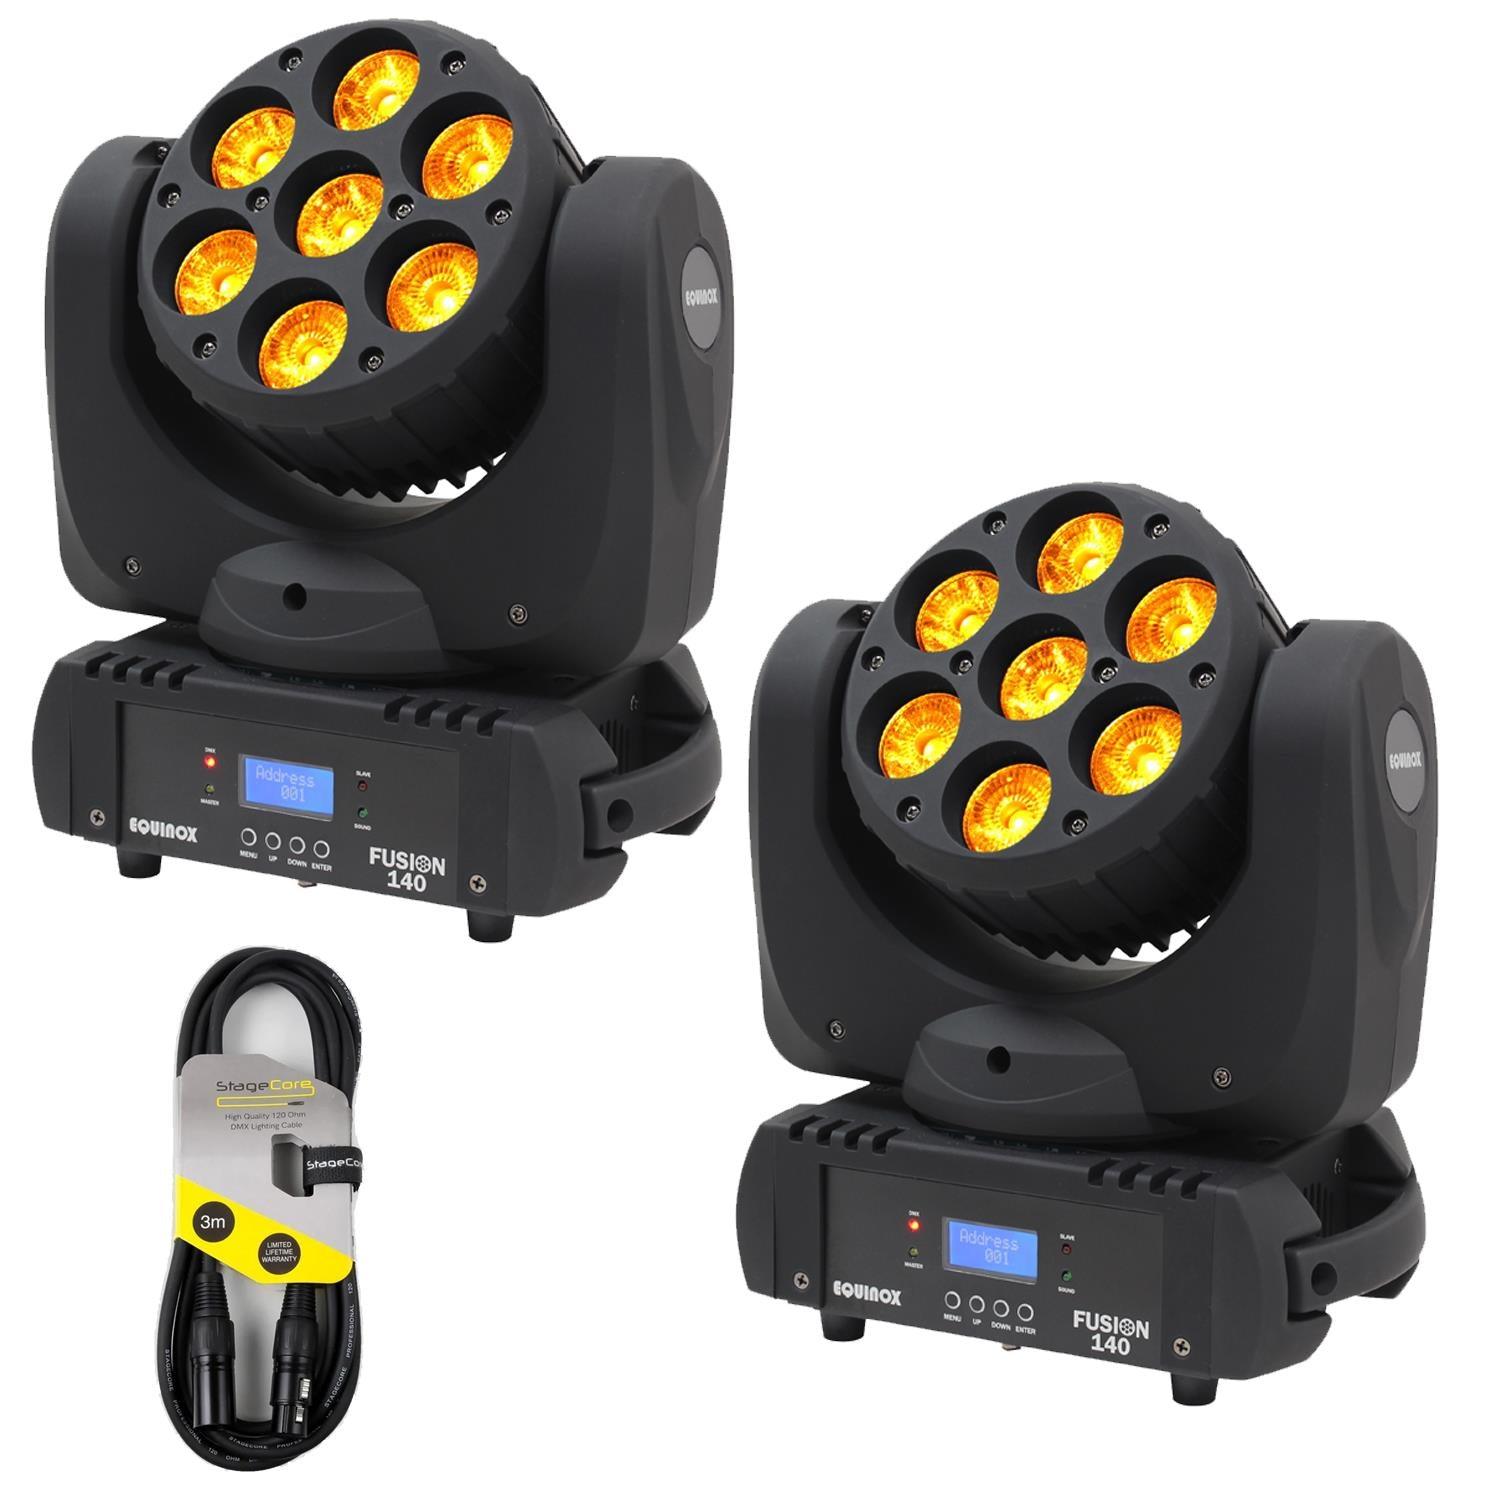 2 x Equinox Fusion 140 Moving Head Wash with DMX Cable - DY Pro Audio